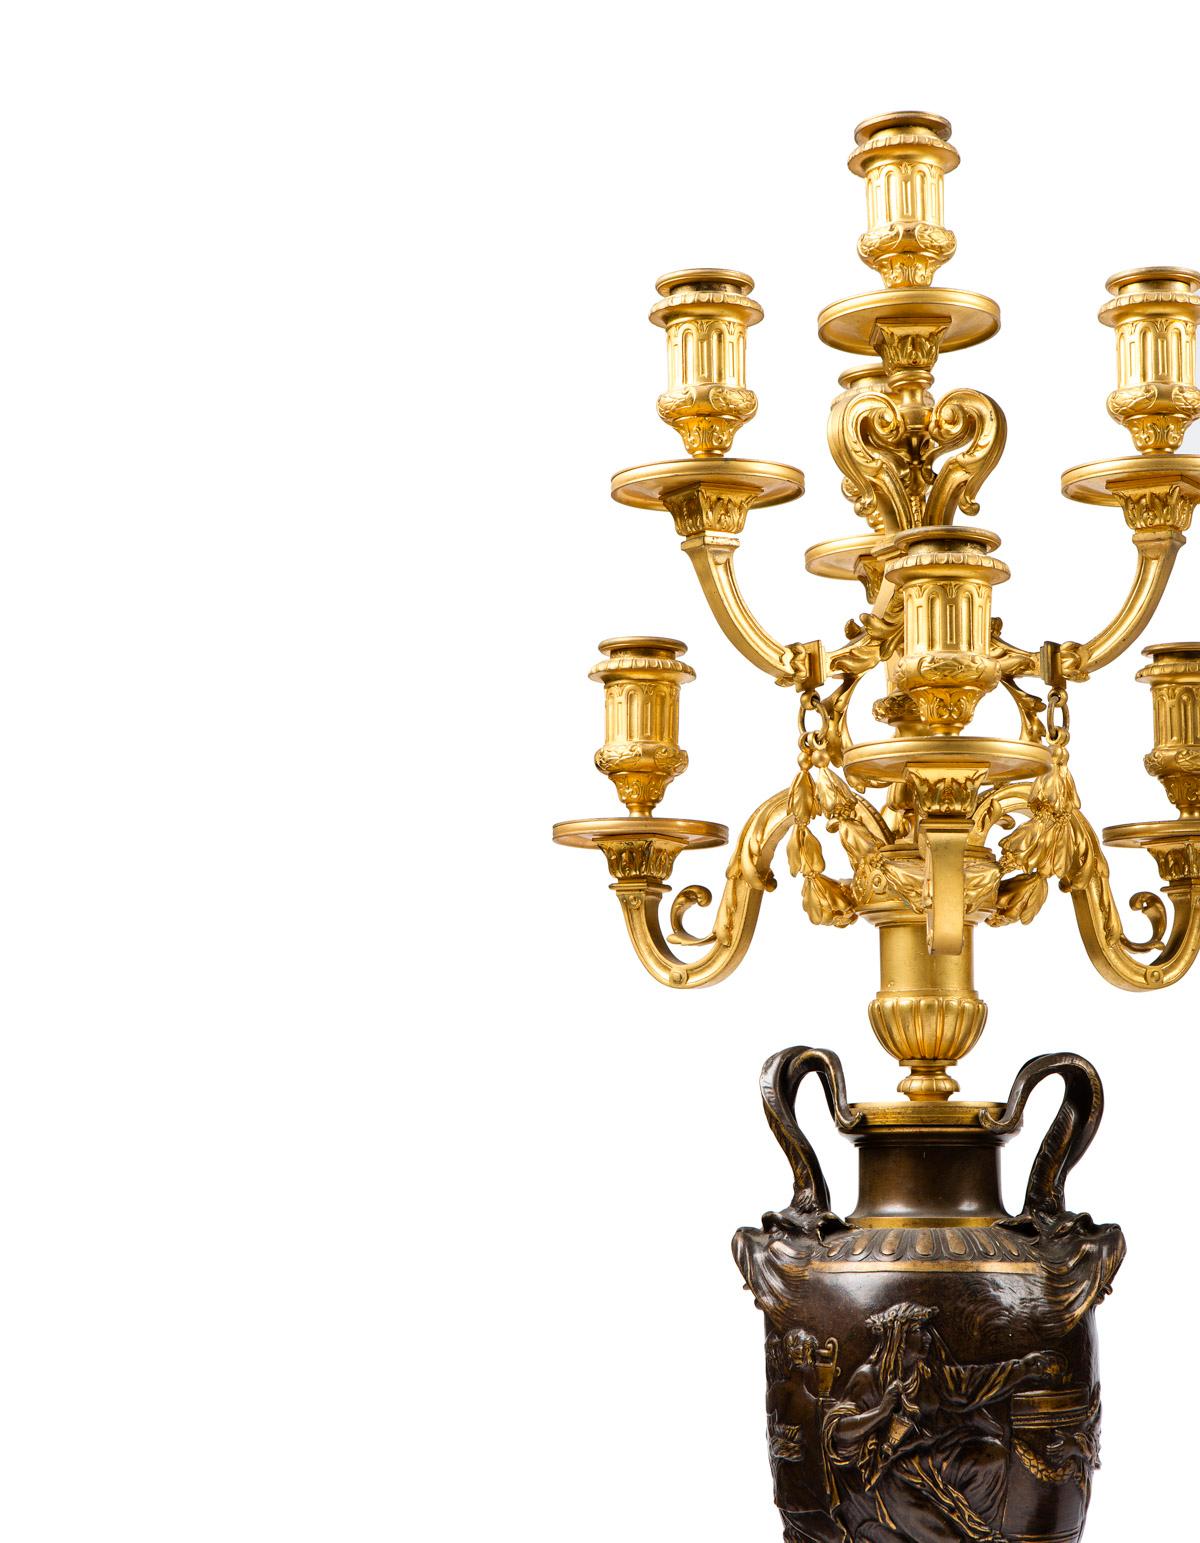 A fine pair of neoclassical style gilt and patinated bronze seven light candelabras
by FERDINAND BARBEDIENNE
Original condition this pair was never touch.